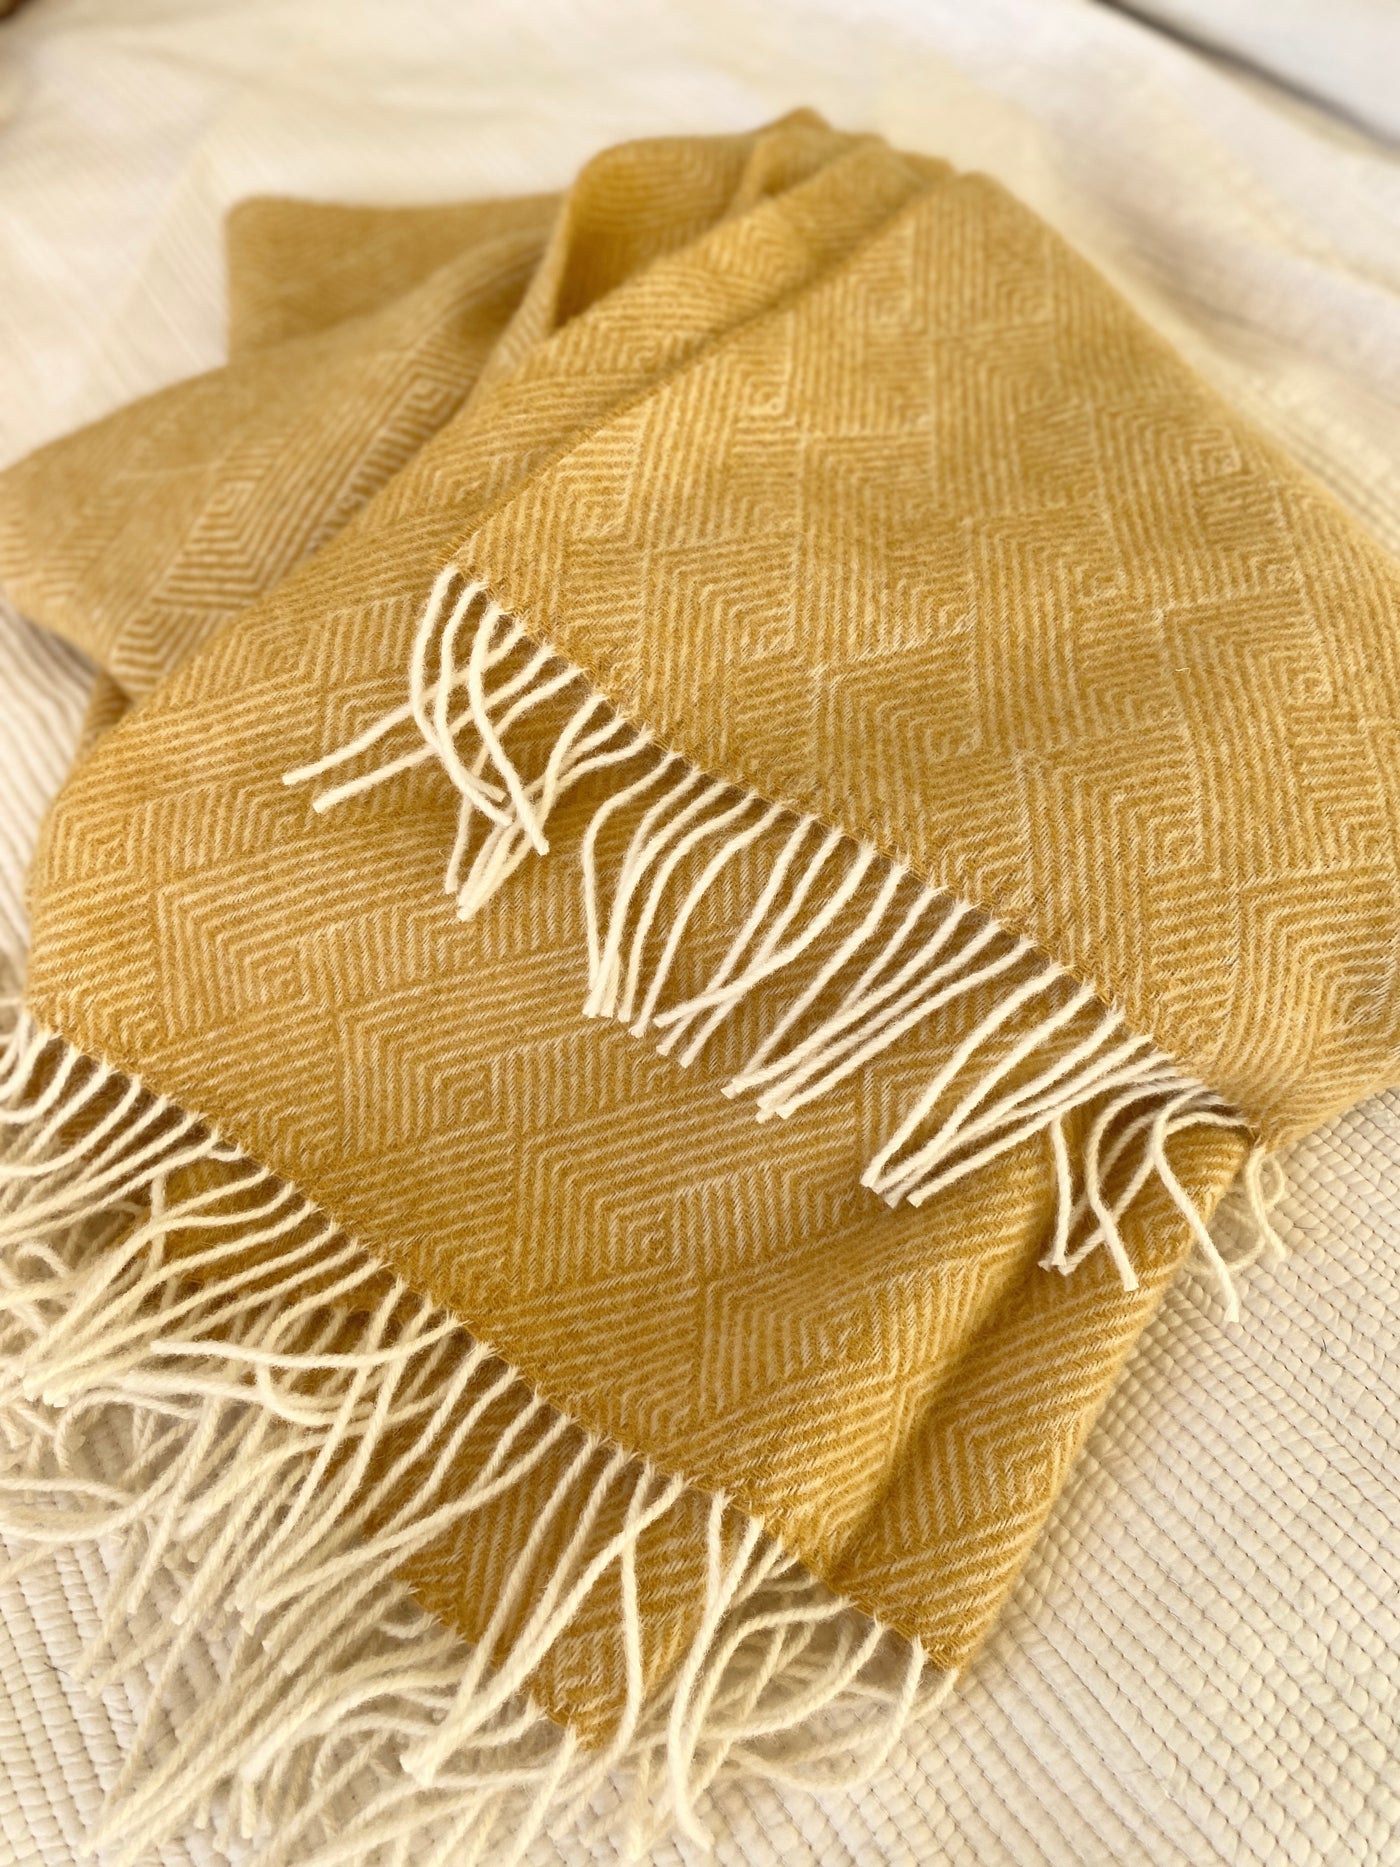 Delamere Throw - Tuscan Yellow